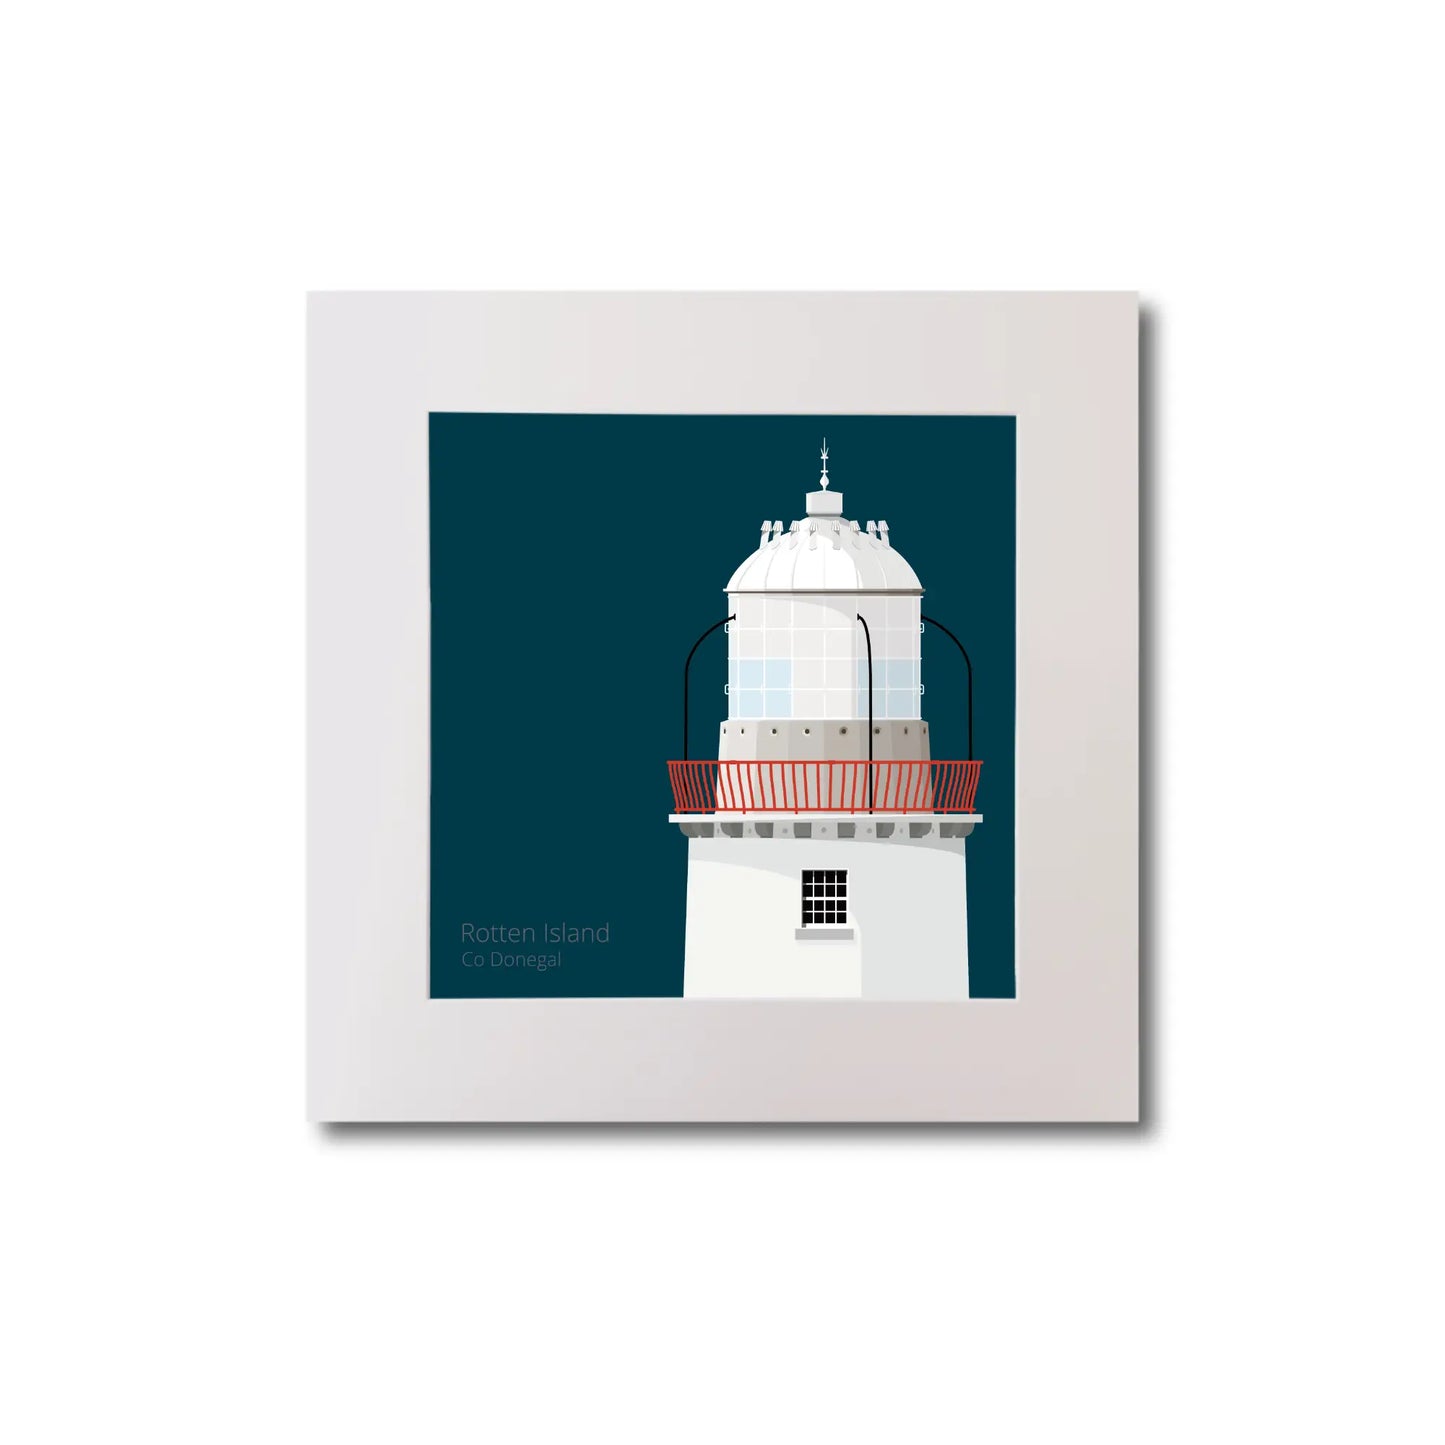 Illustration Rotten Island lighthouse on a midnight blue background, mounted and measuring 20x20cm.